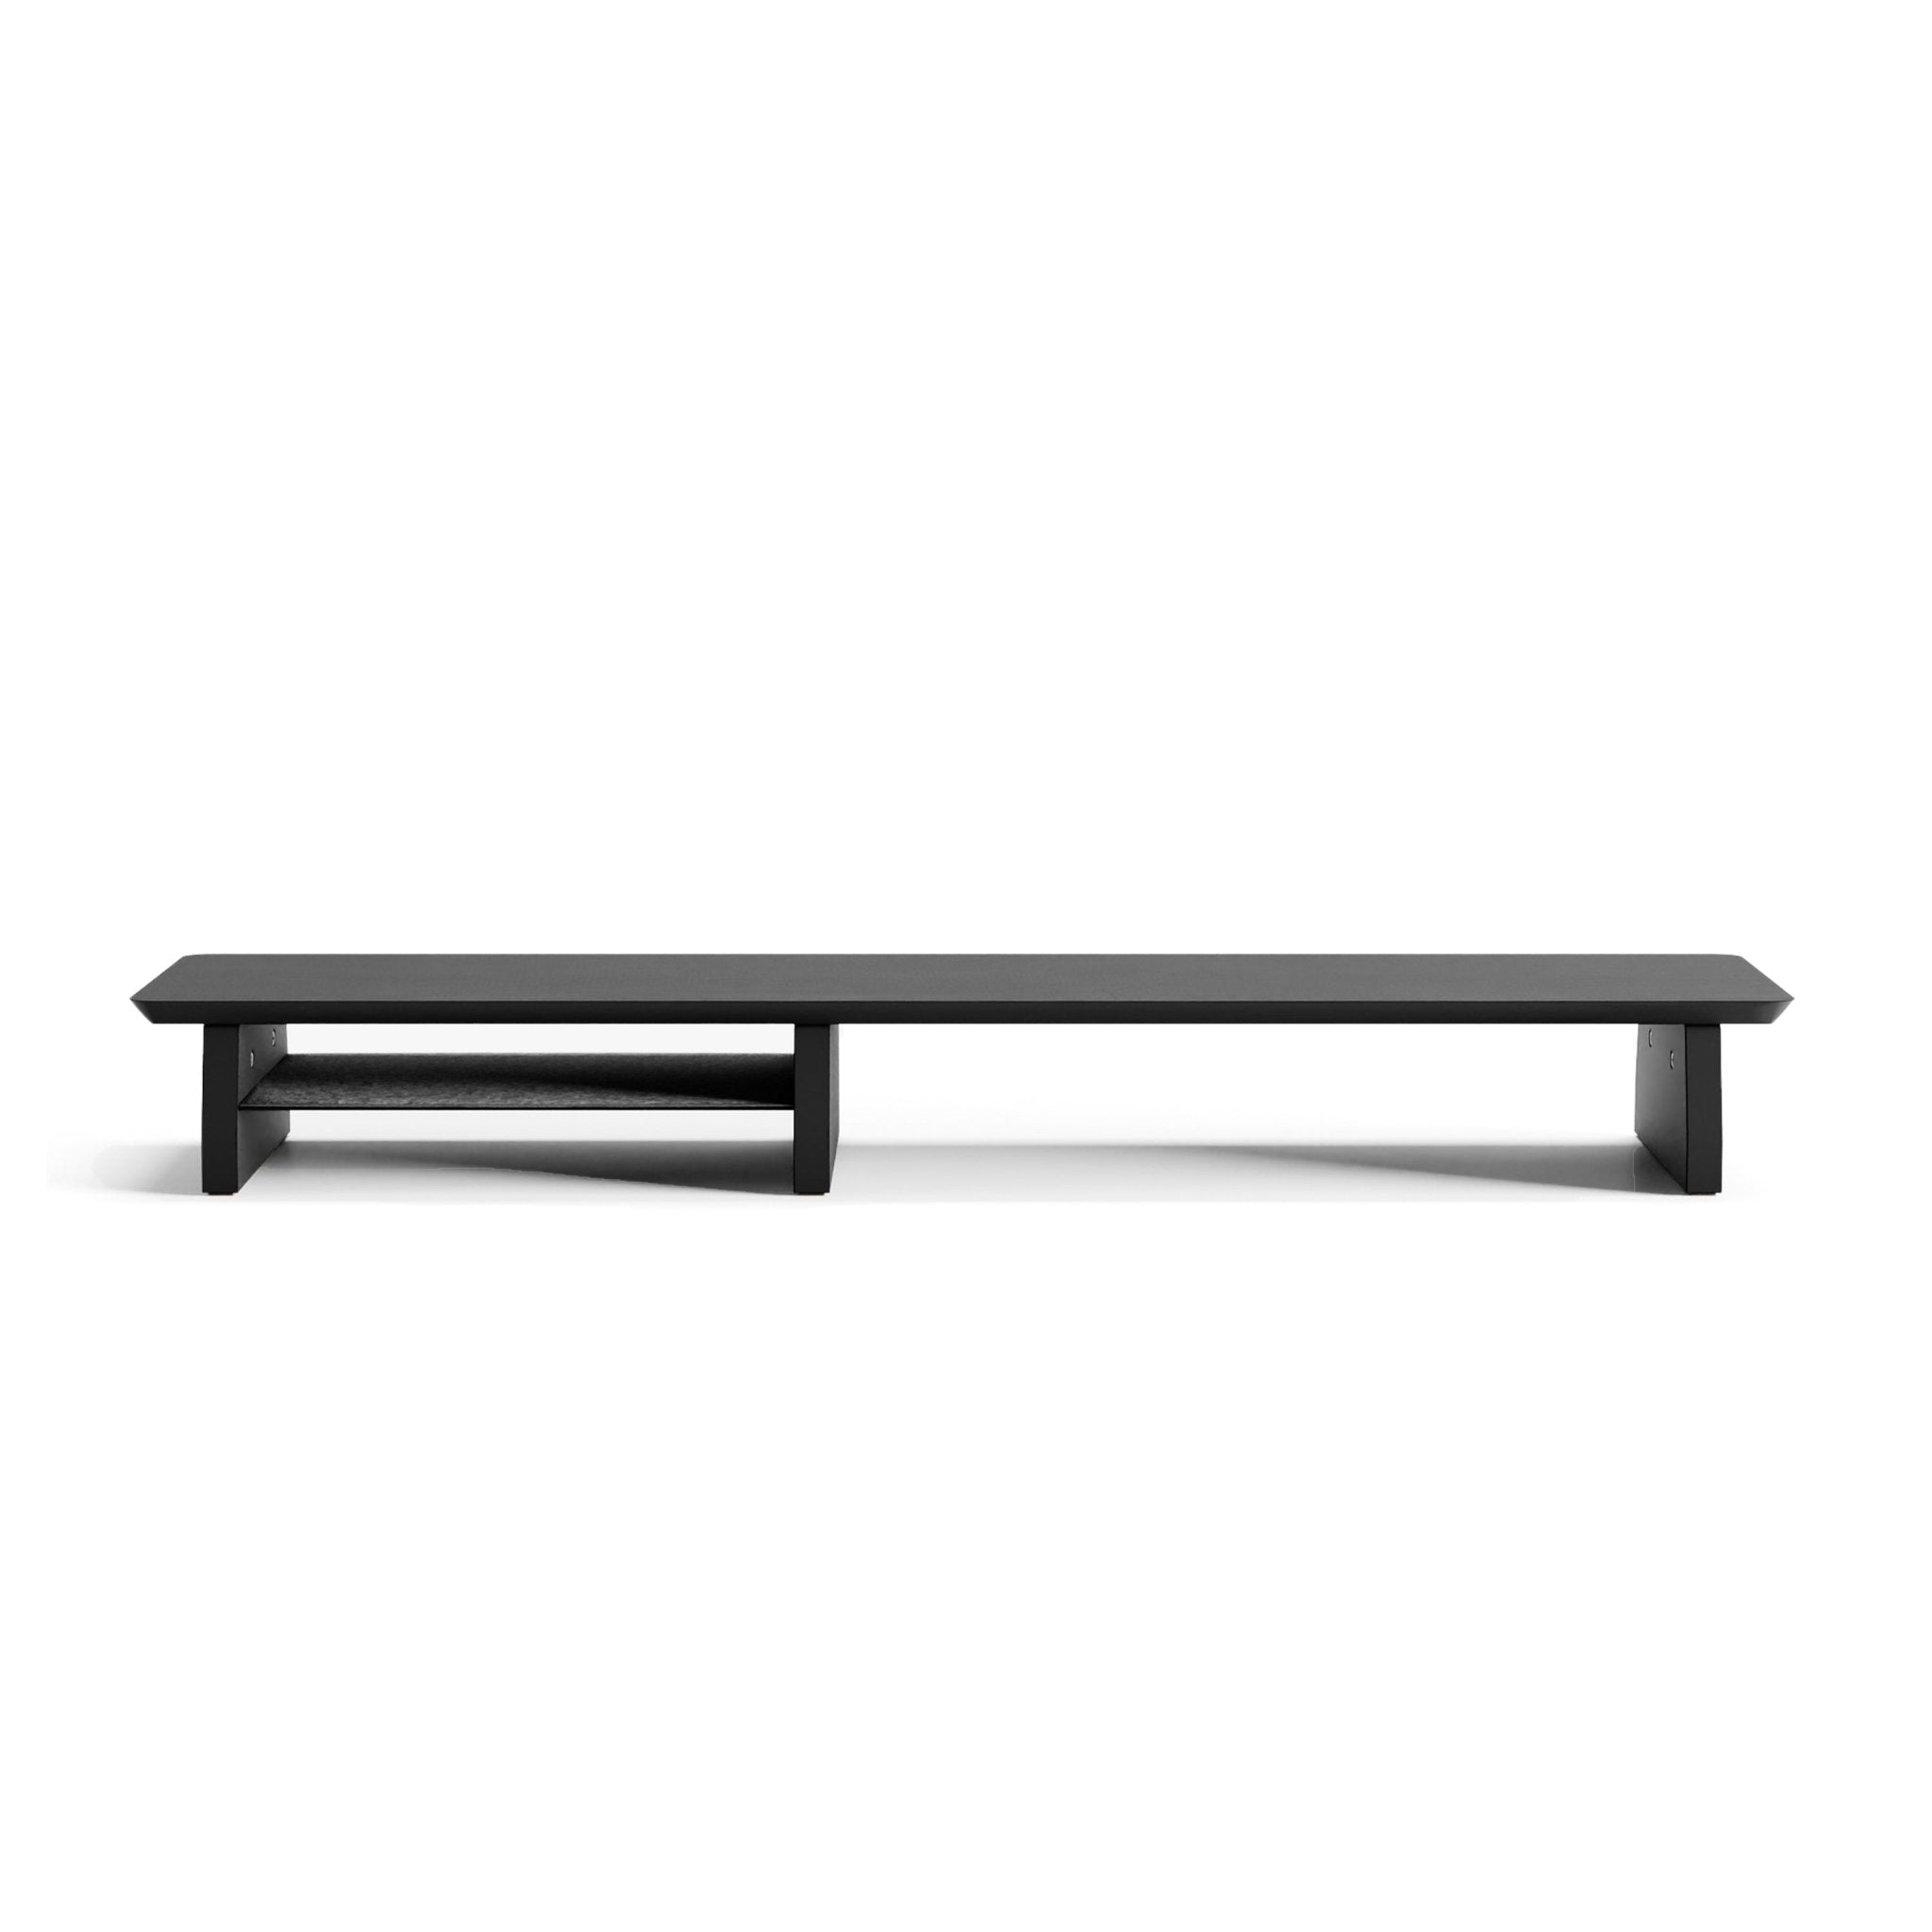 Desk shelf for monitor in medium size painted in deep black colourt